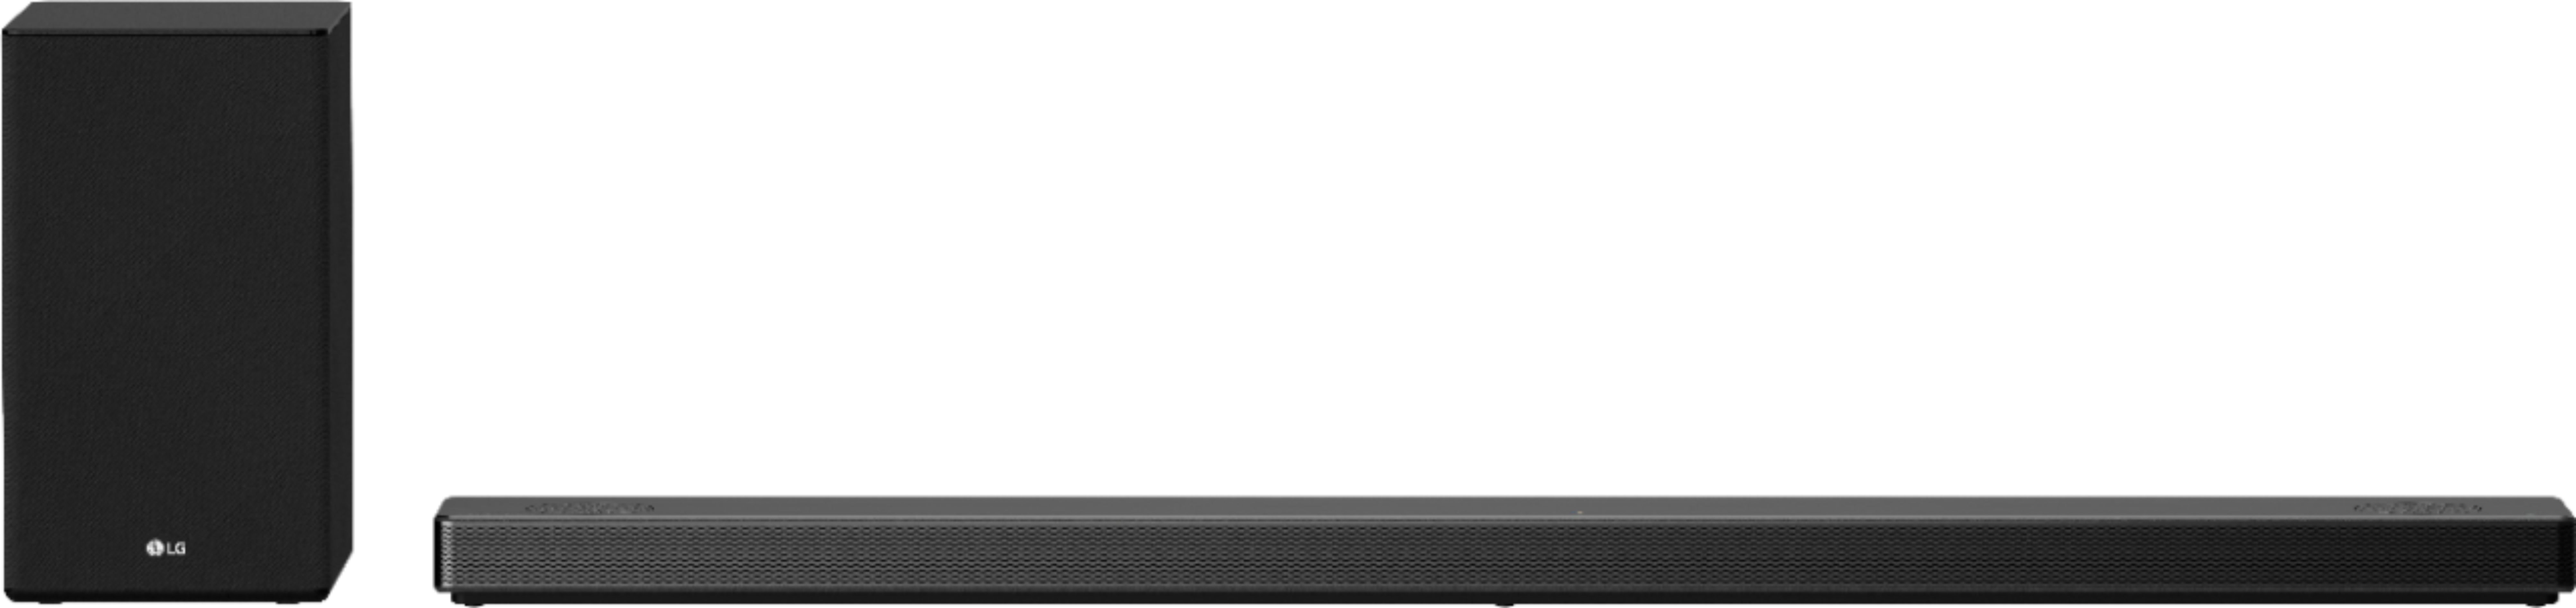 Best Buy: LG 5.1.2-Channel 570W Soundbar System with Wireless Subwoofer Atmos with Google Assistant Black LG SN10YG